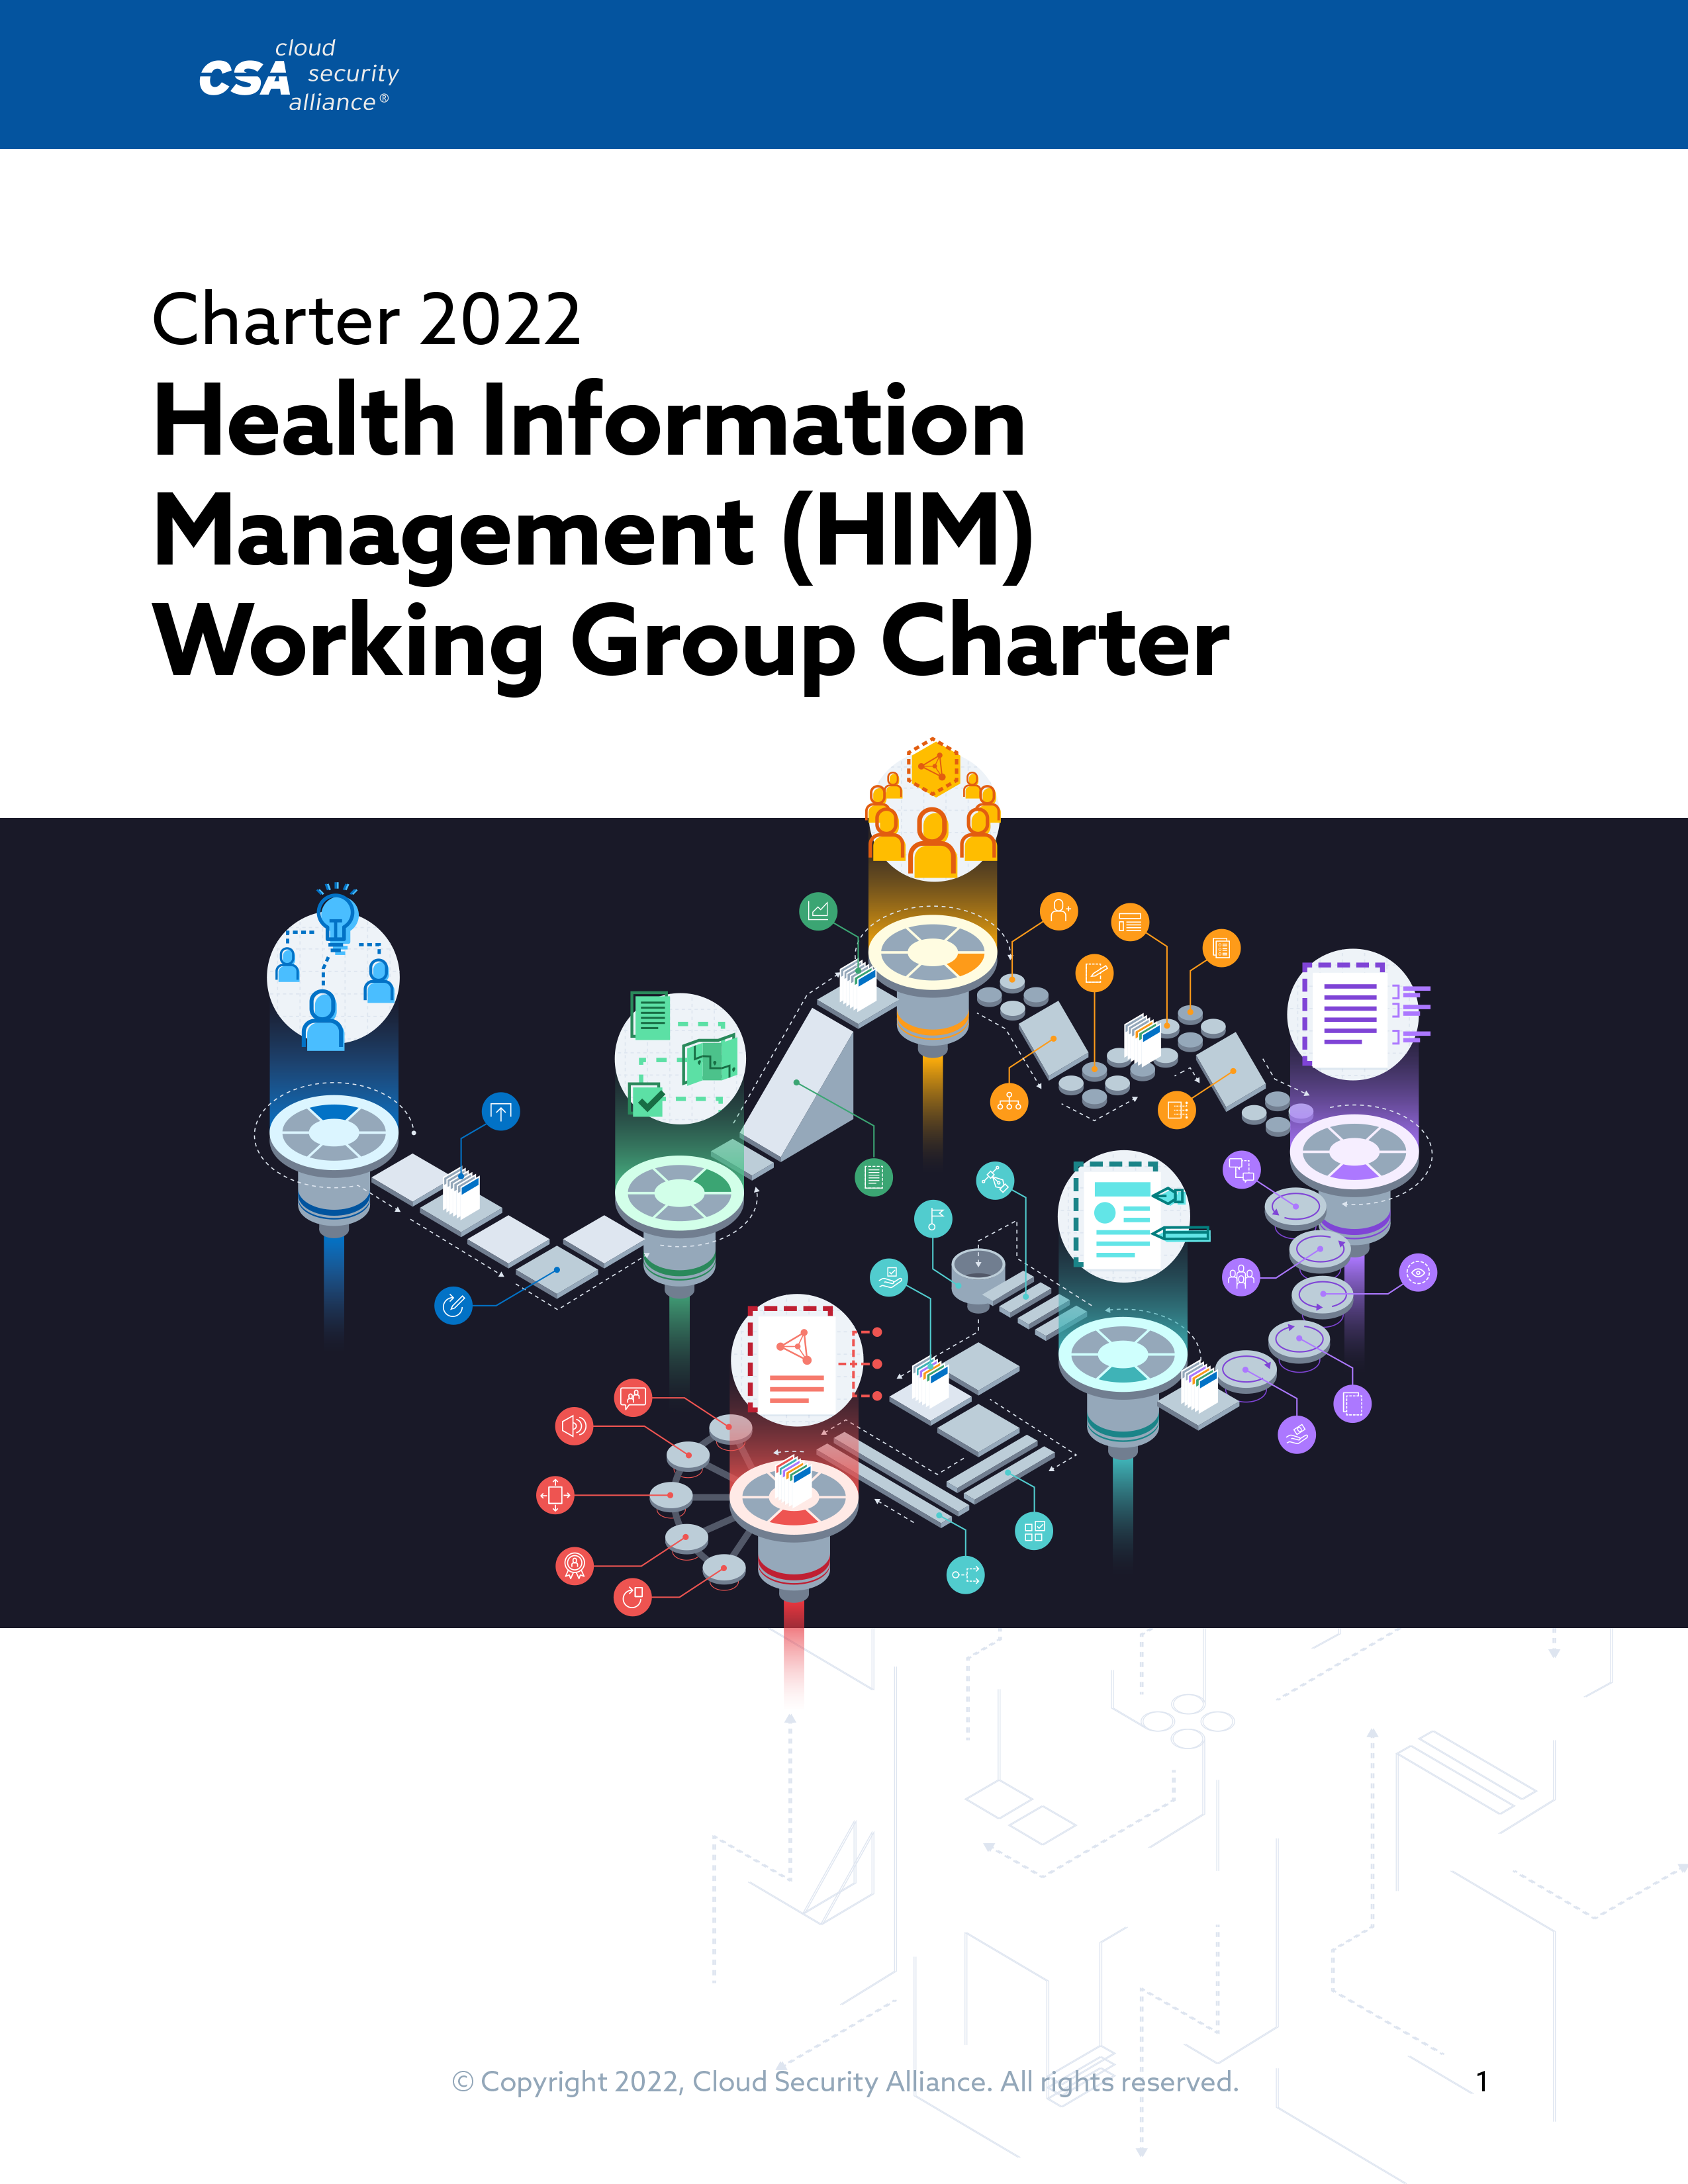 Health Information Management Working Group Charter